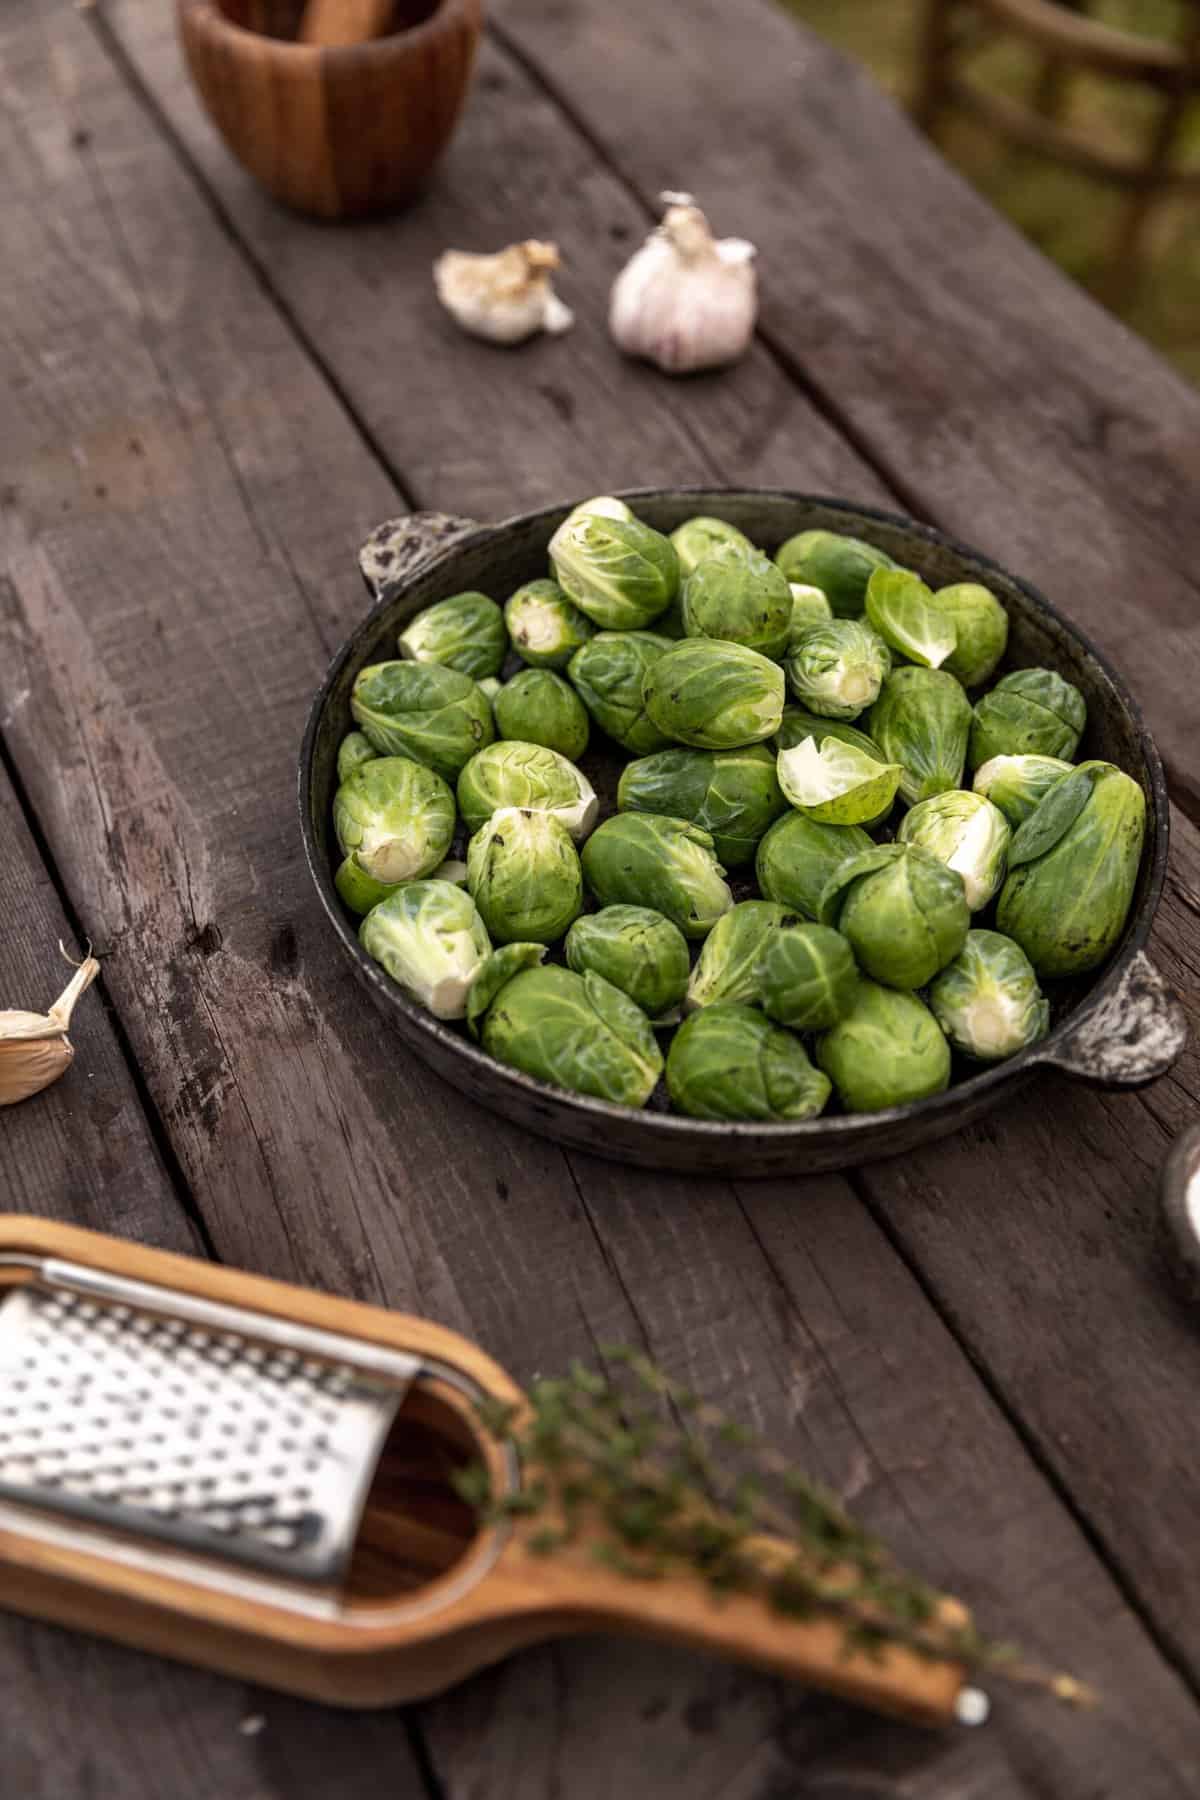 Are Brussels sprouts keto picture of them in a bowl